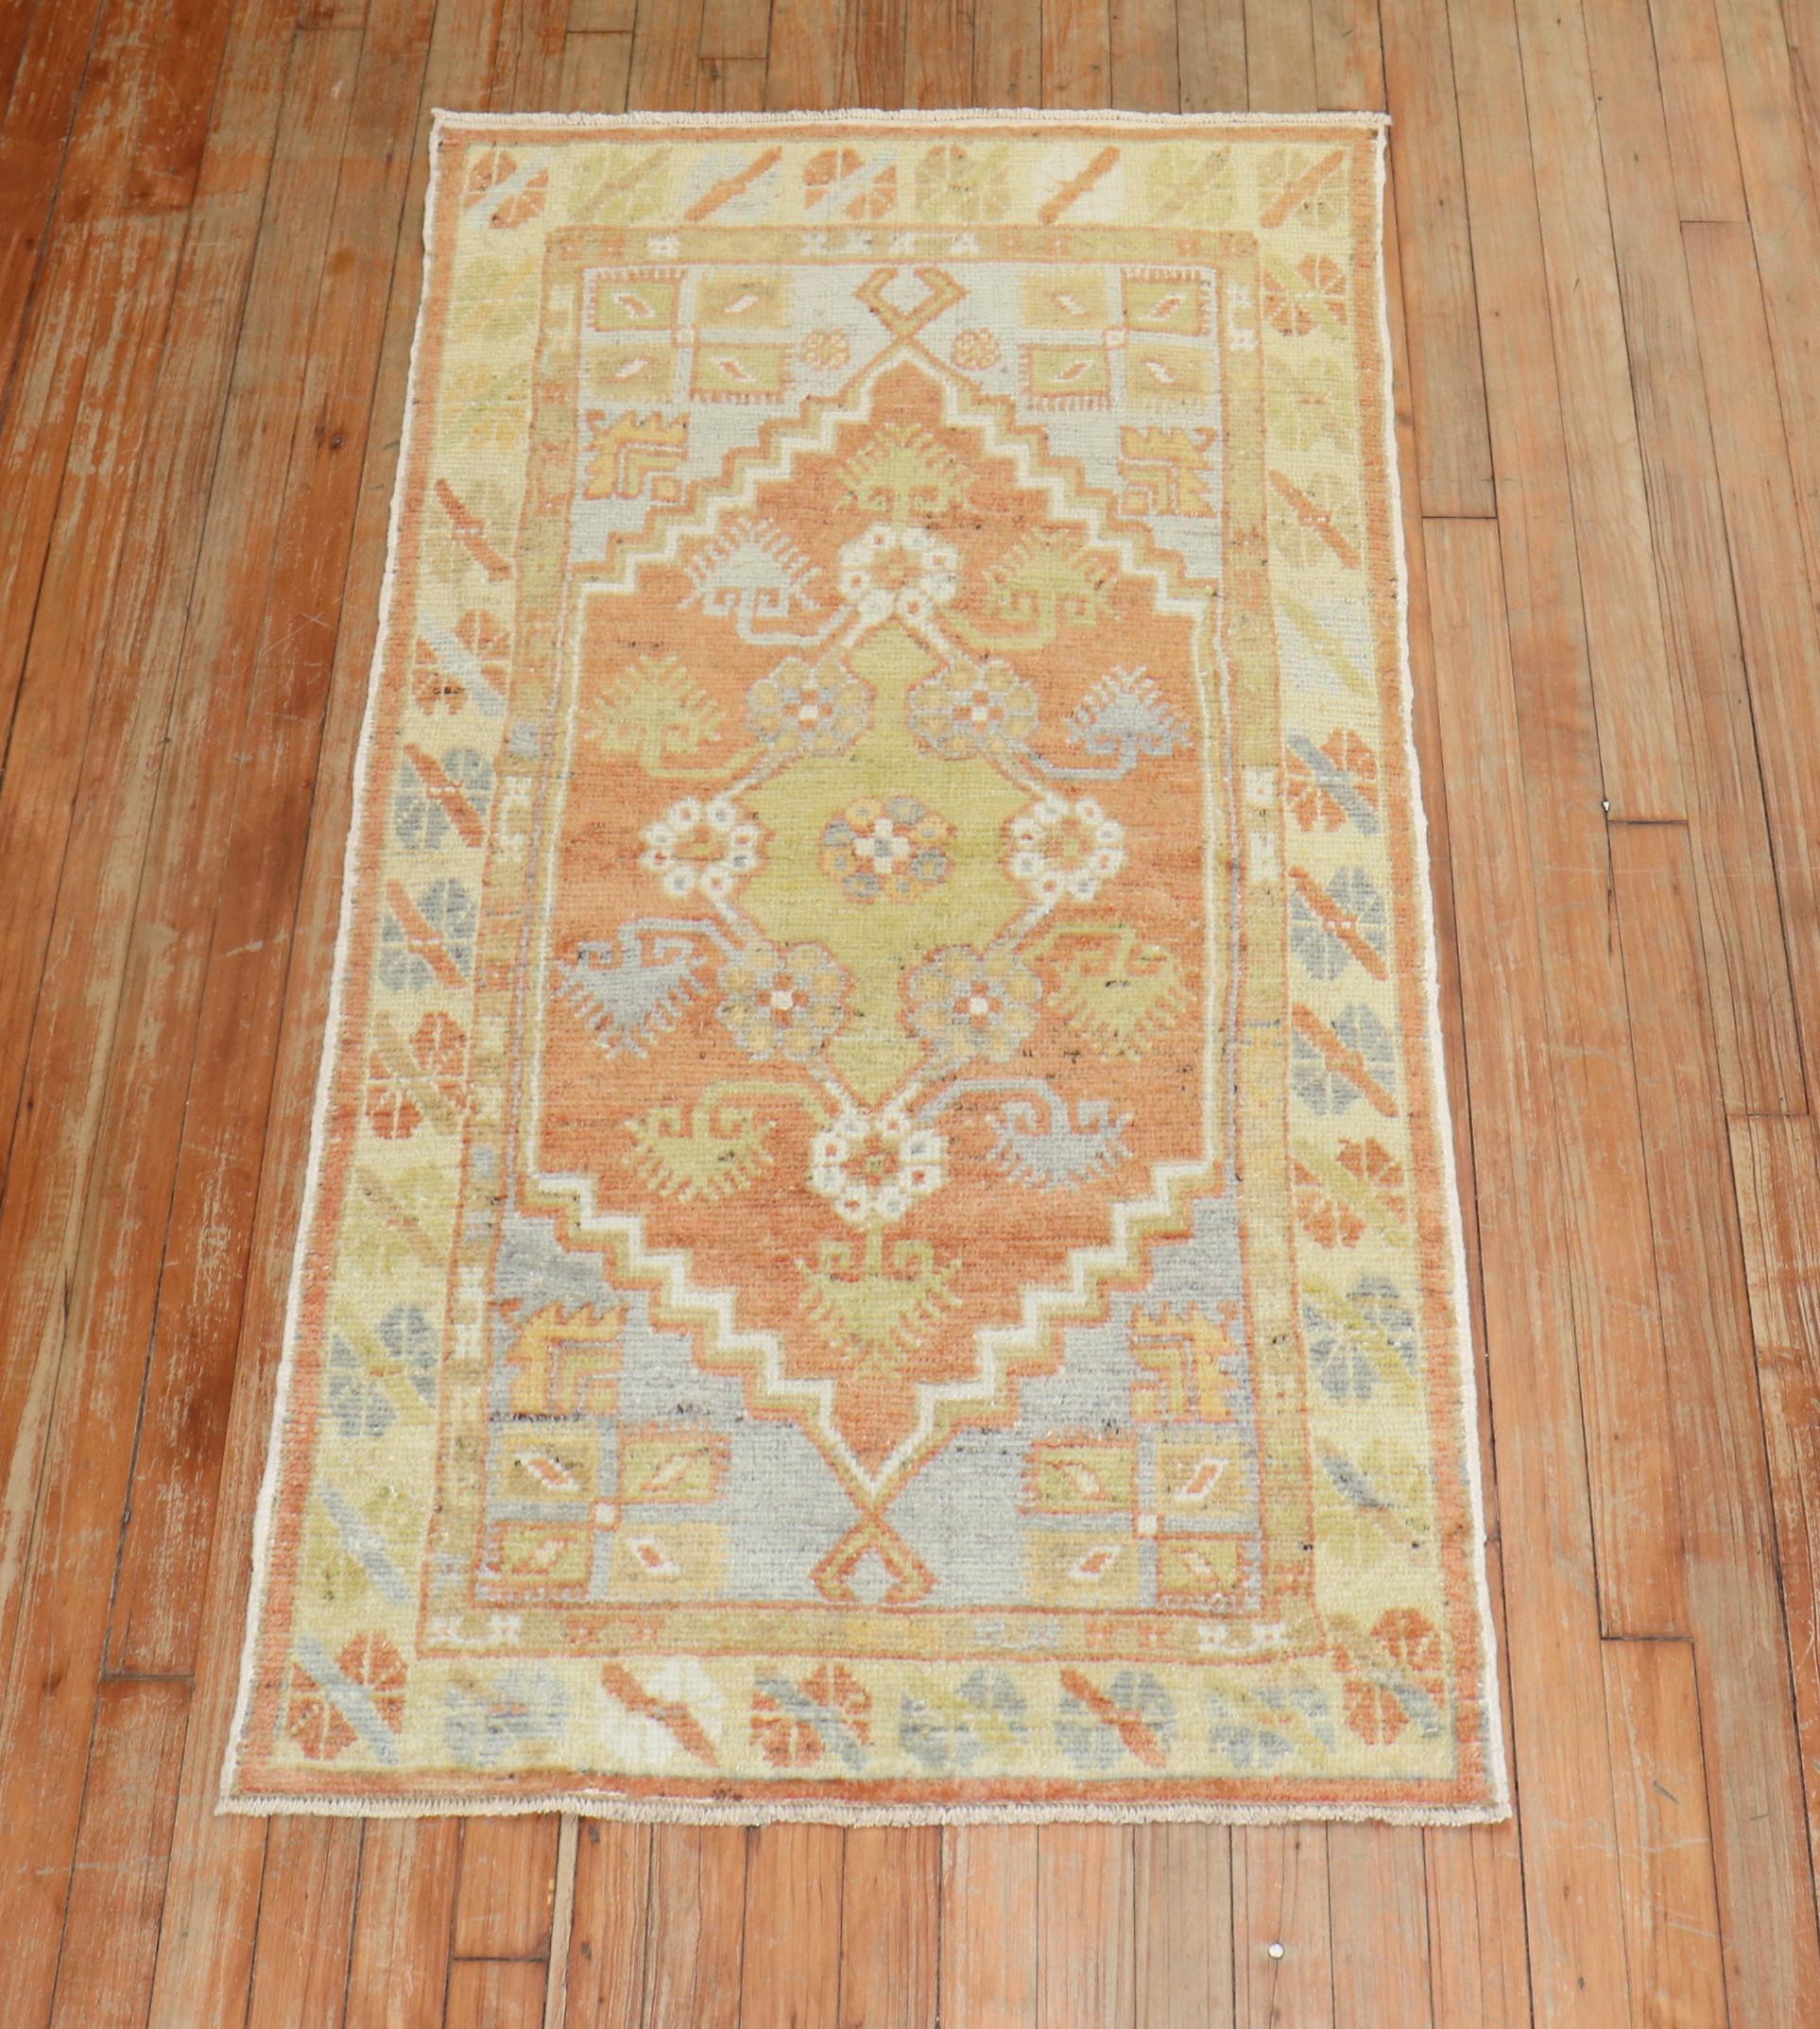 mid 20th century turkish anatolian scatter size rug in warm colors

rug no.	31744
size	2' 6